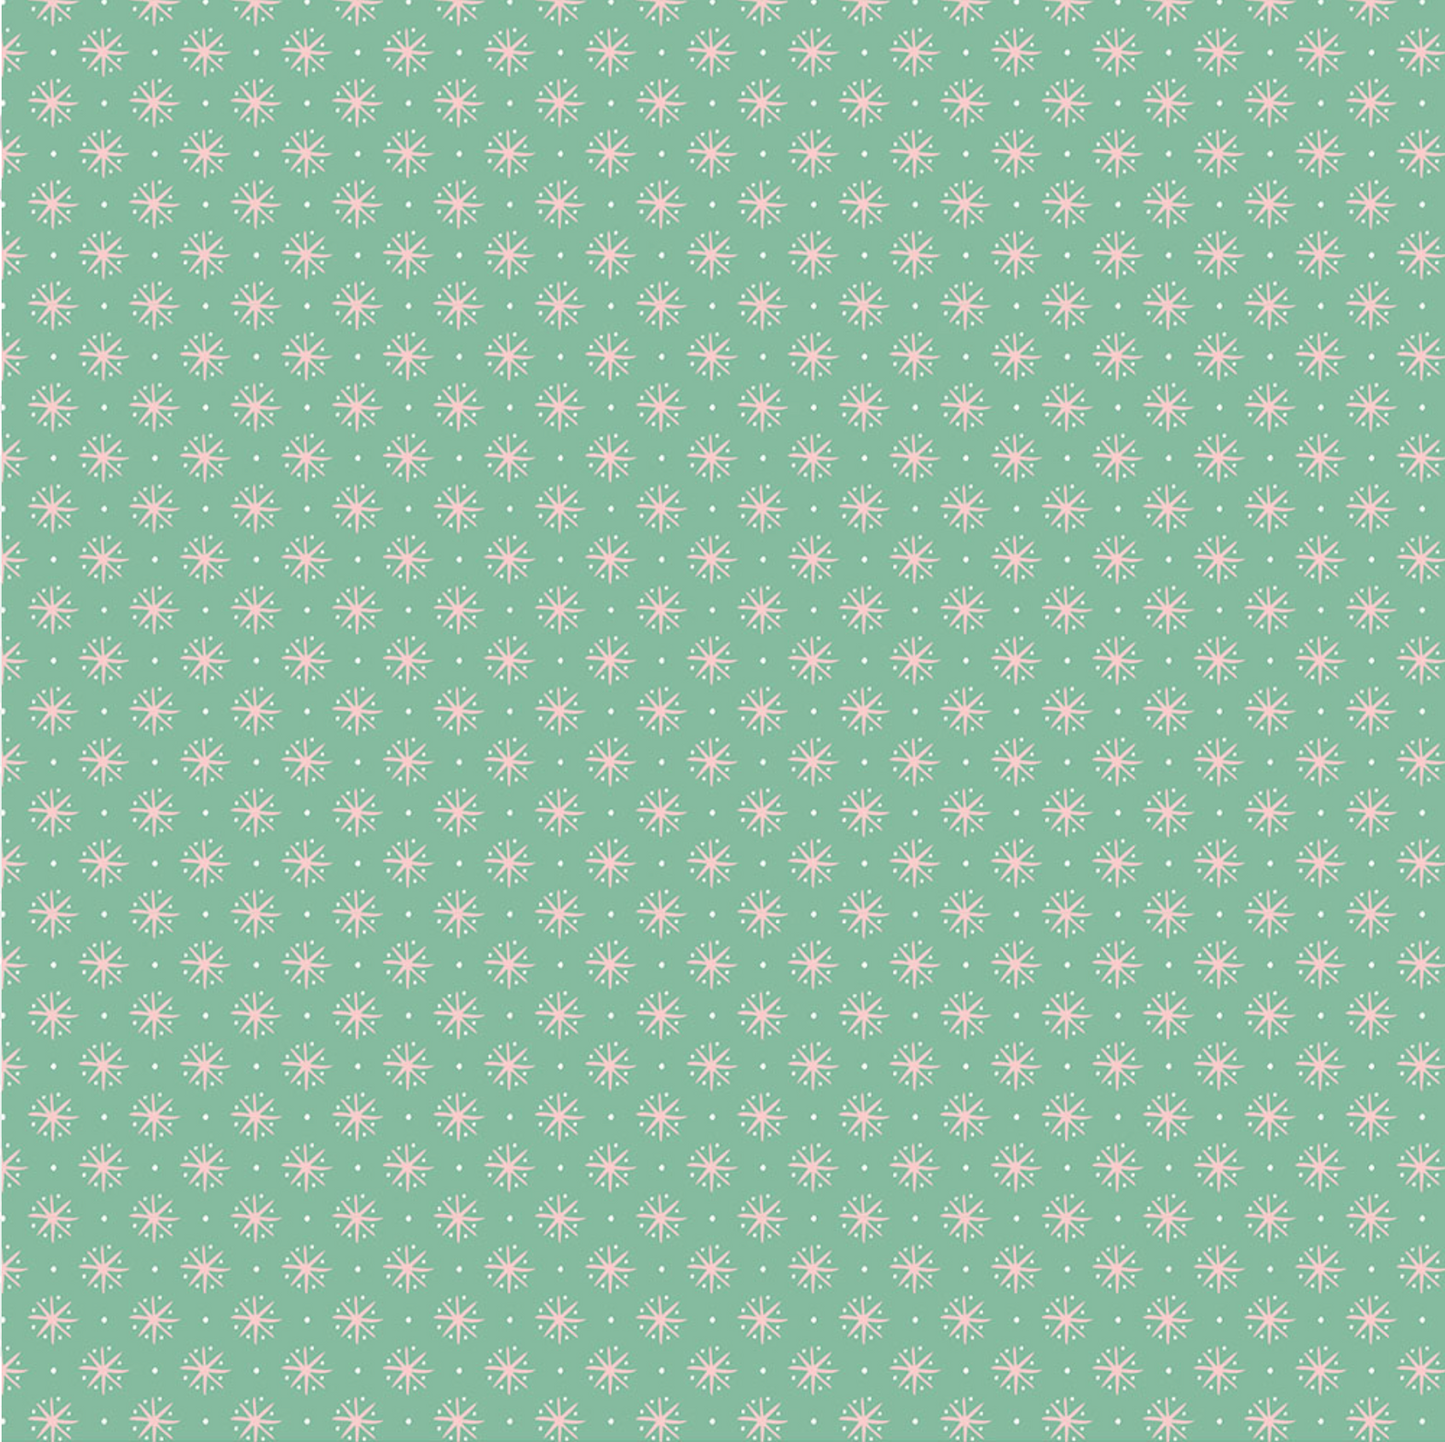 Finding Wonder Fabric, Twinkle Tiny, Teal, FW24218, sold by the 1/2 yard, *PREORDER